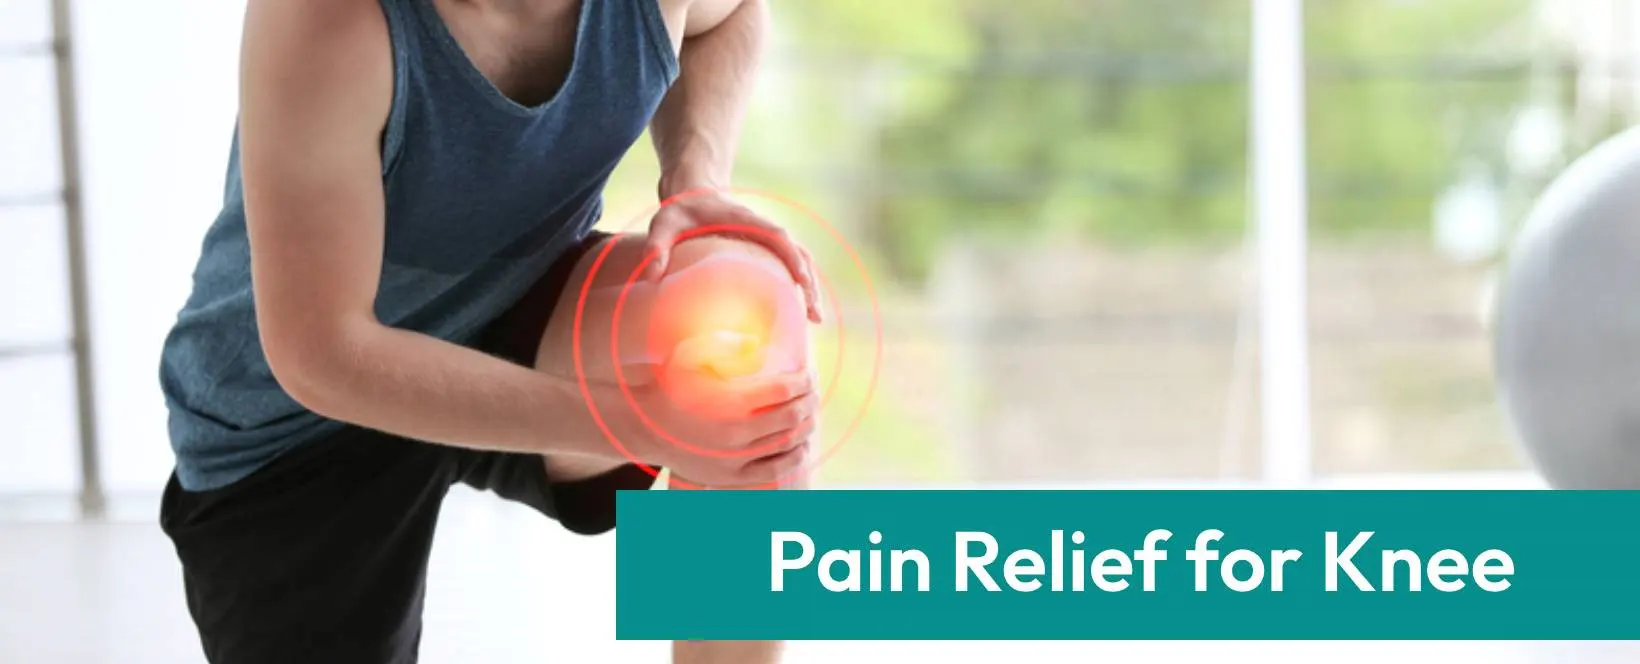 Pain Reliever Treatment for Knee | Revolutionary Relief